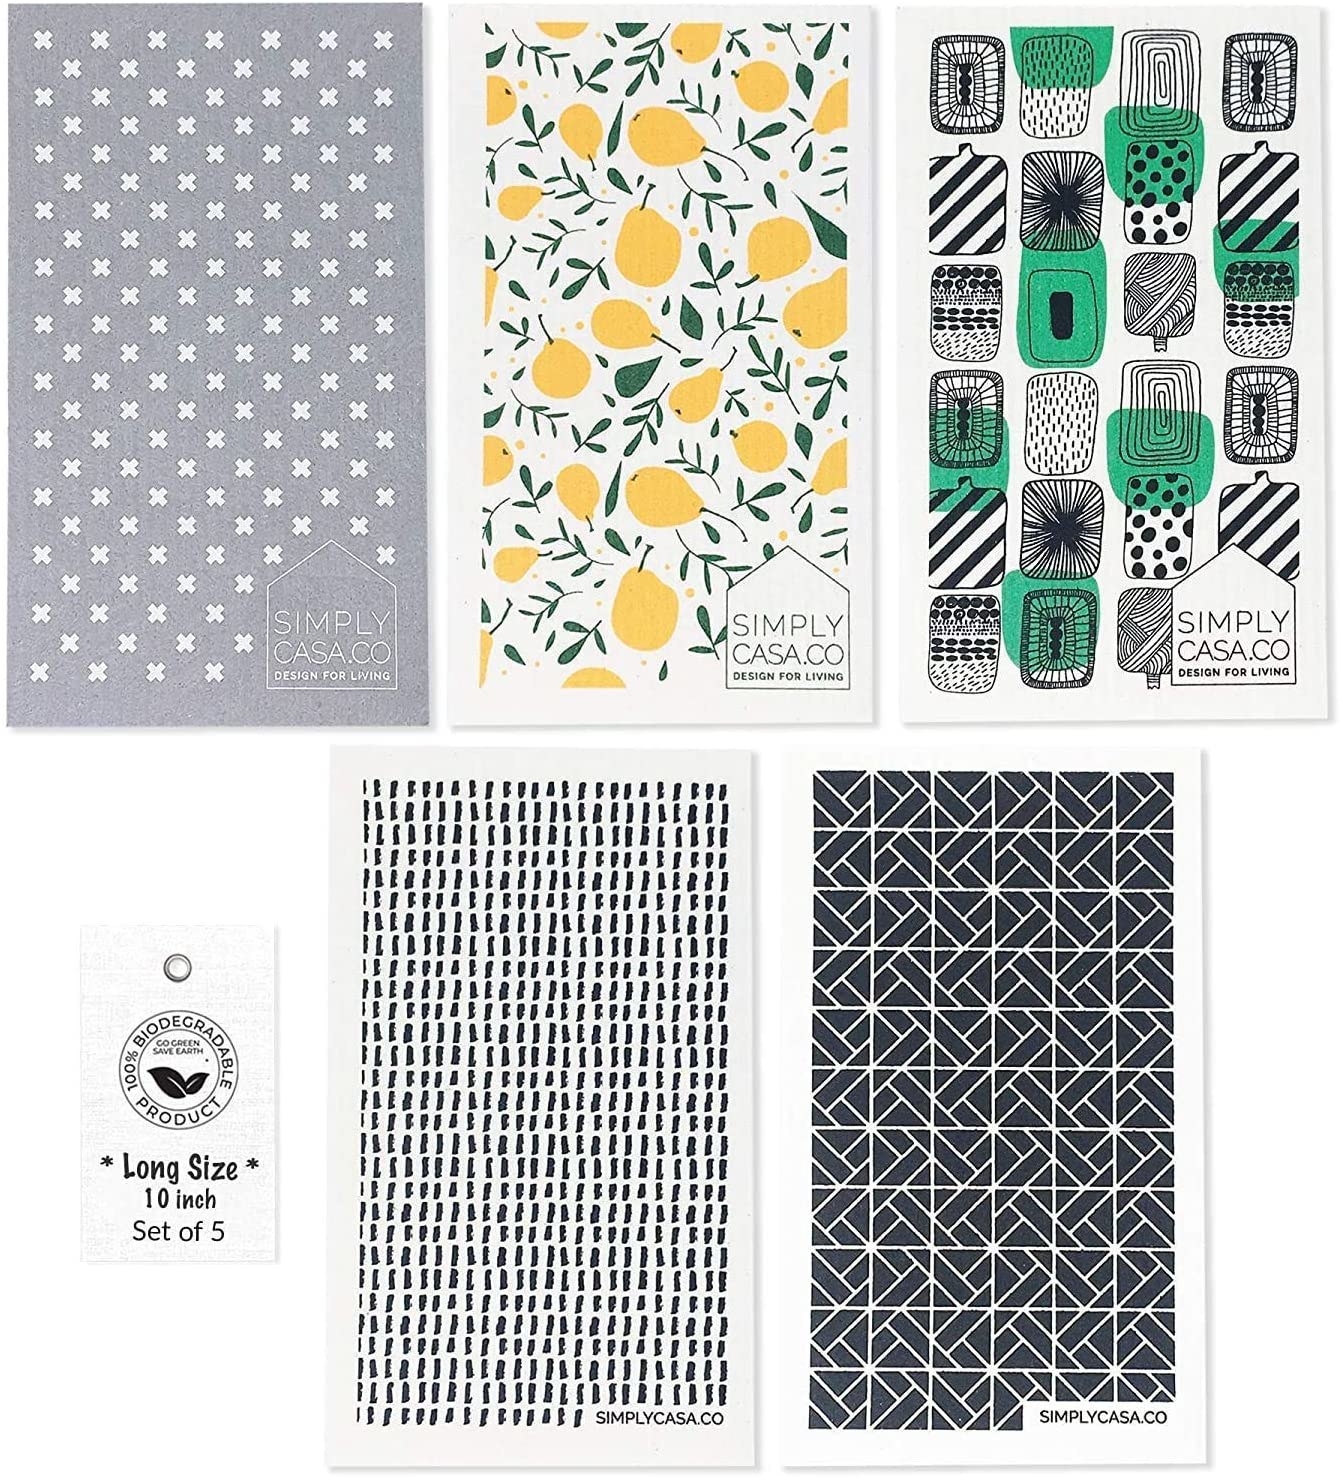 A set of five patterned Swedish towels, which are an eco-friendly alternative to paper towels.